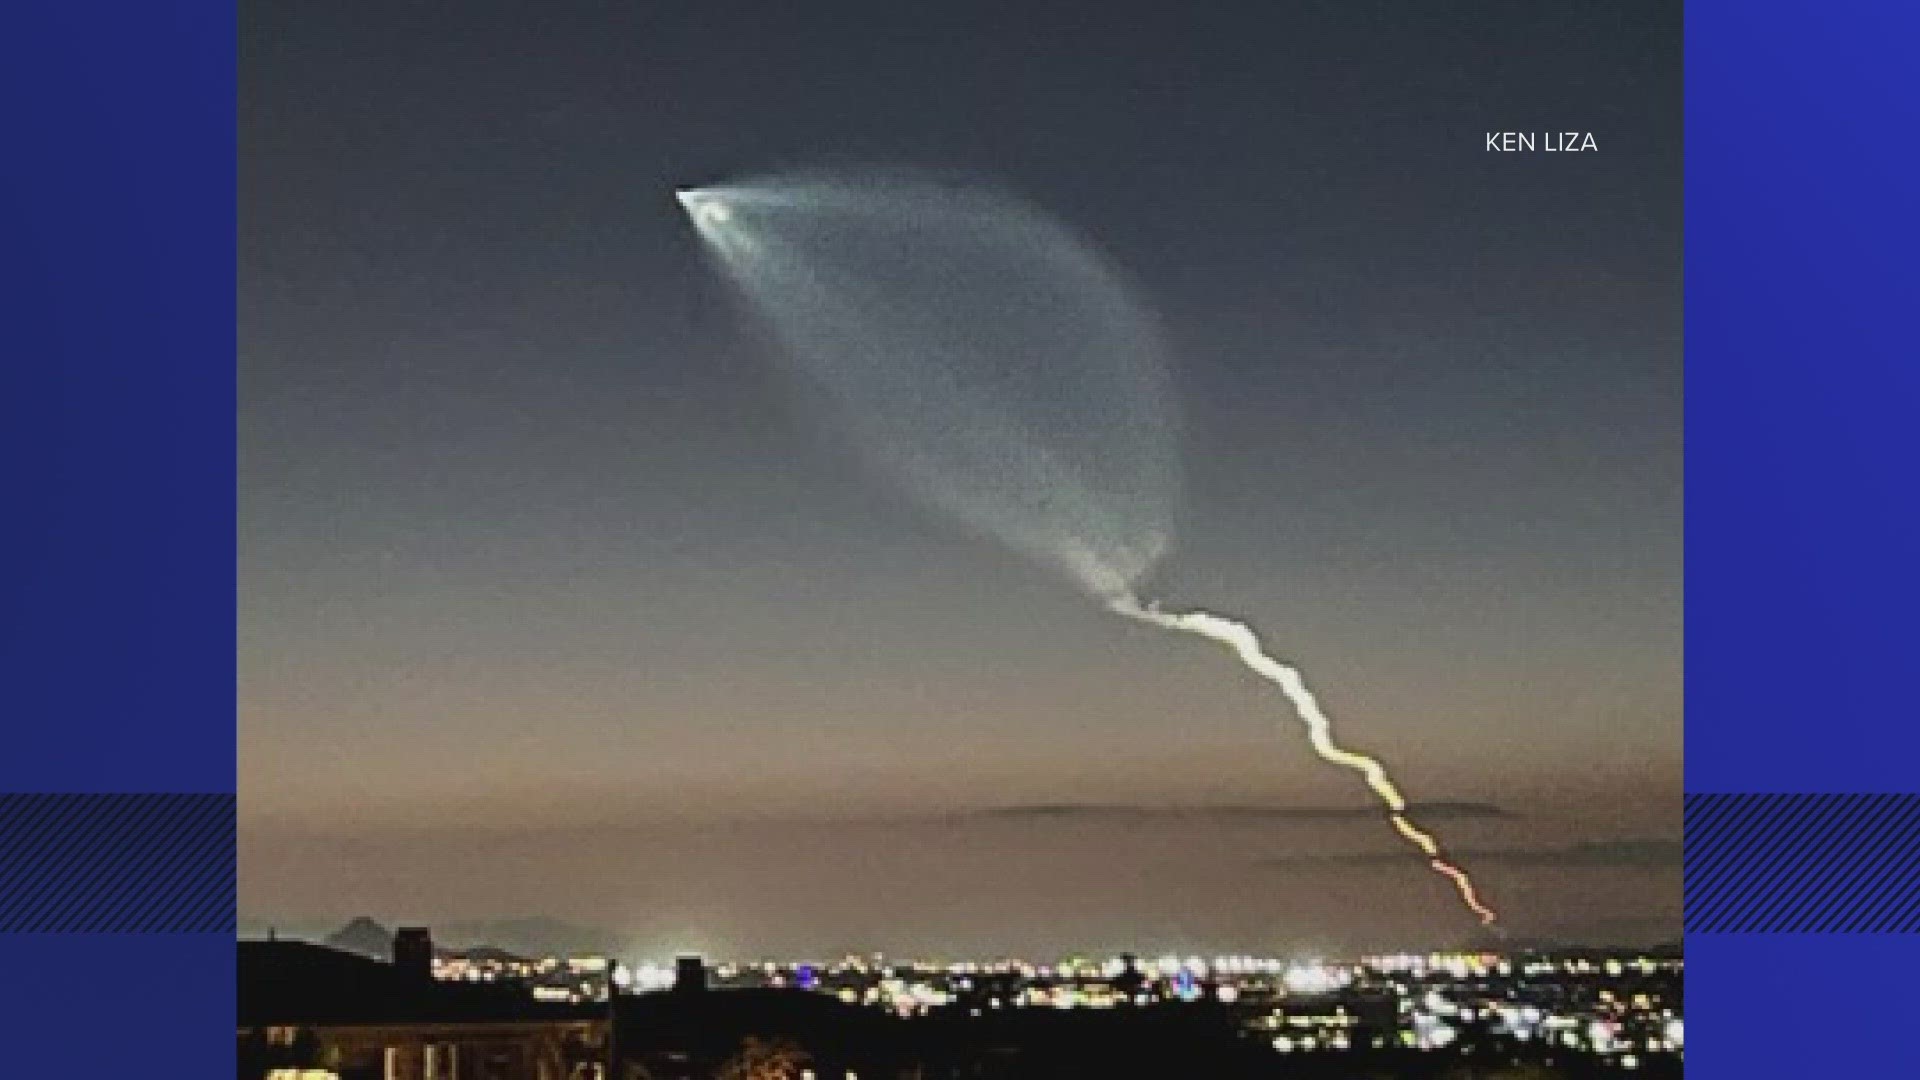 The rocket, part of the VICTUS NOX mission, was seen in Arizona skies on Thursday night.